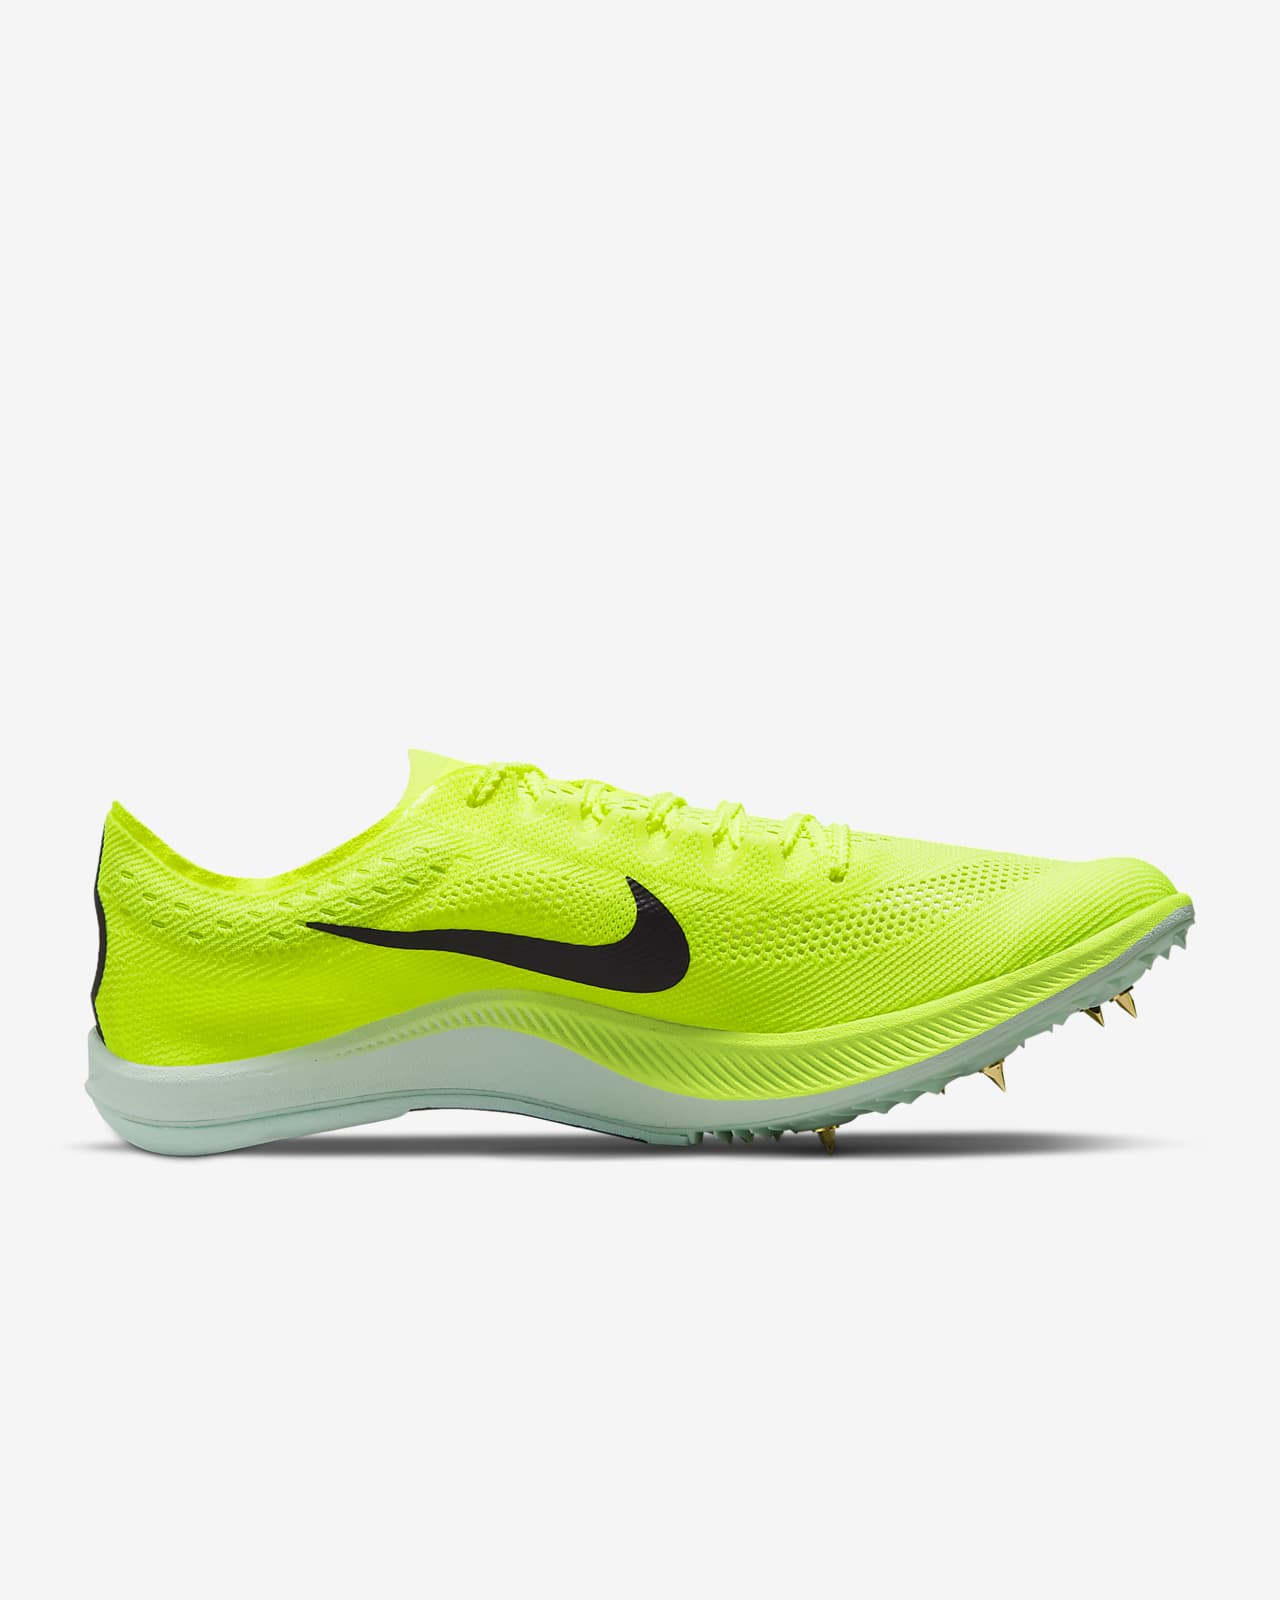 Nike ZoomX Dragonfly Track & Field Distance Spikes